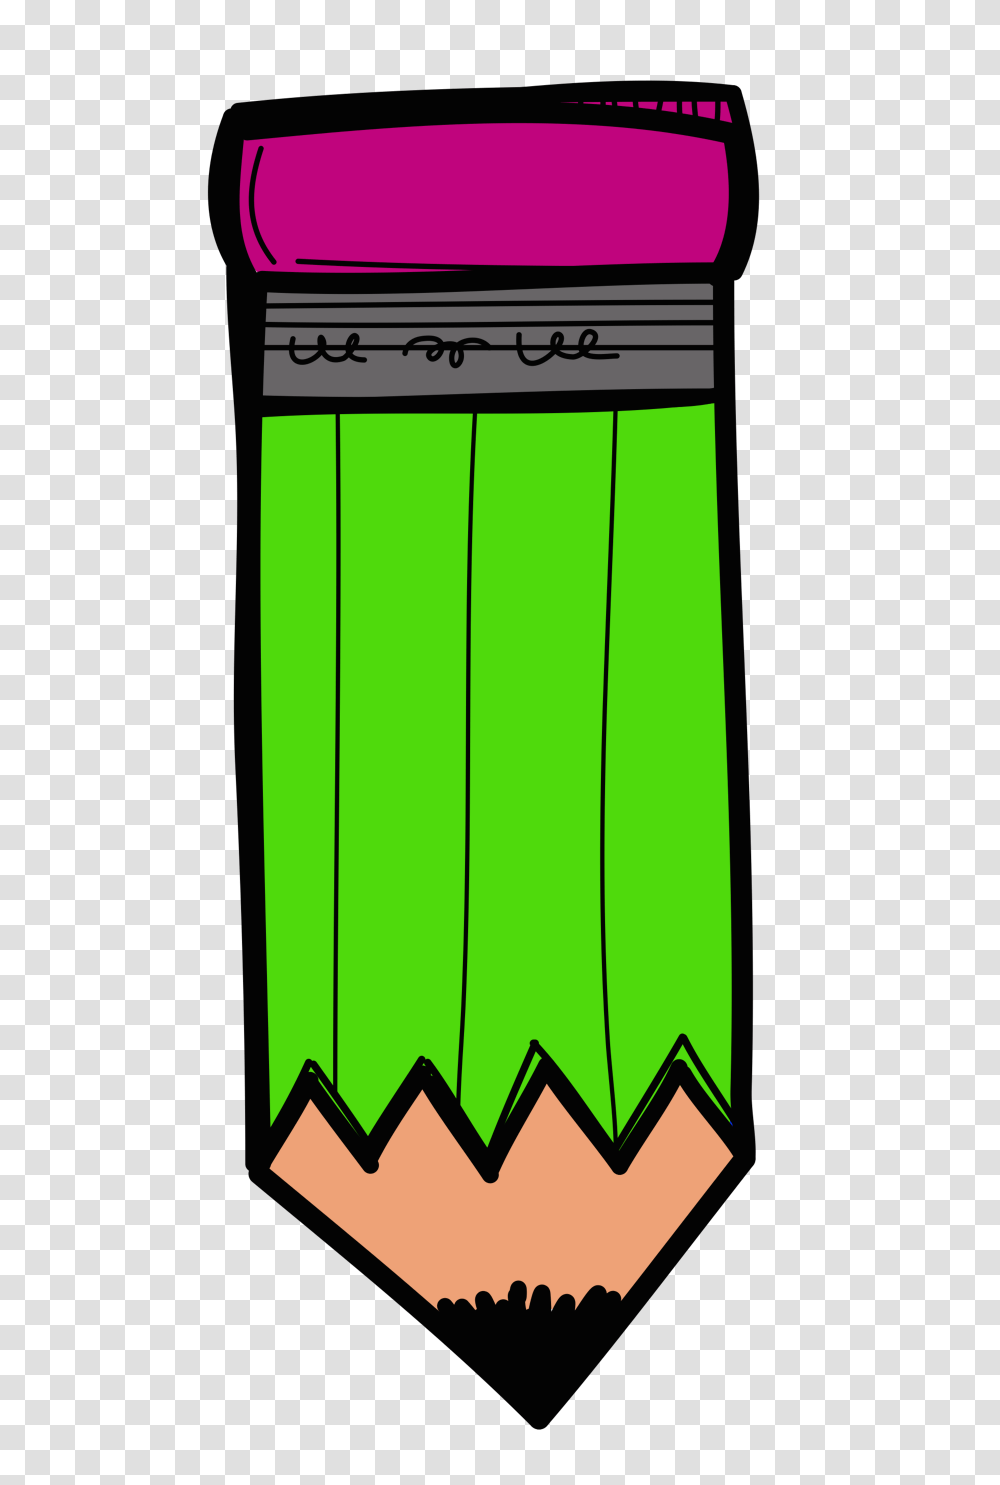 Creative Pencil Color Green Pencil Great Idea To Color Code Your, Lighting, Lamp Transparent Png